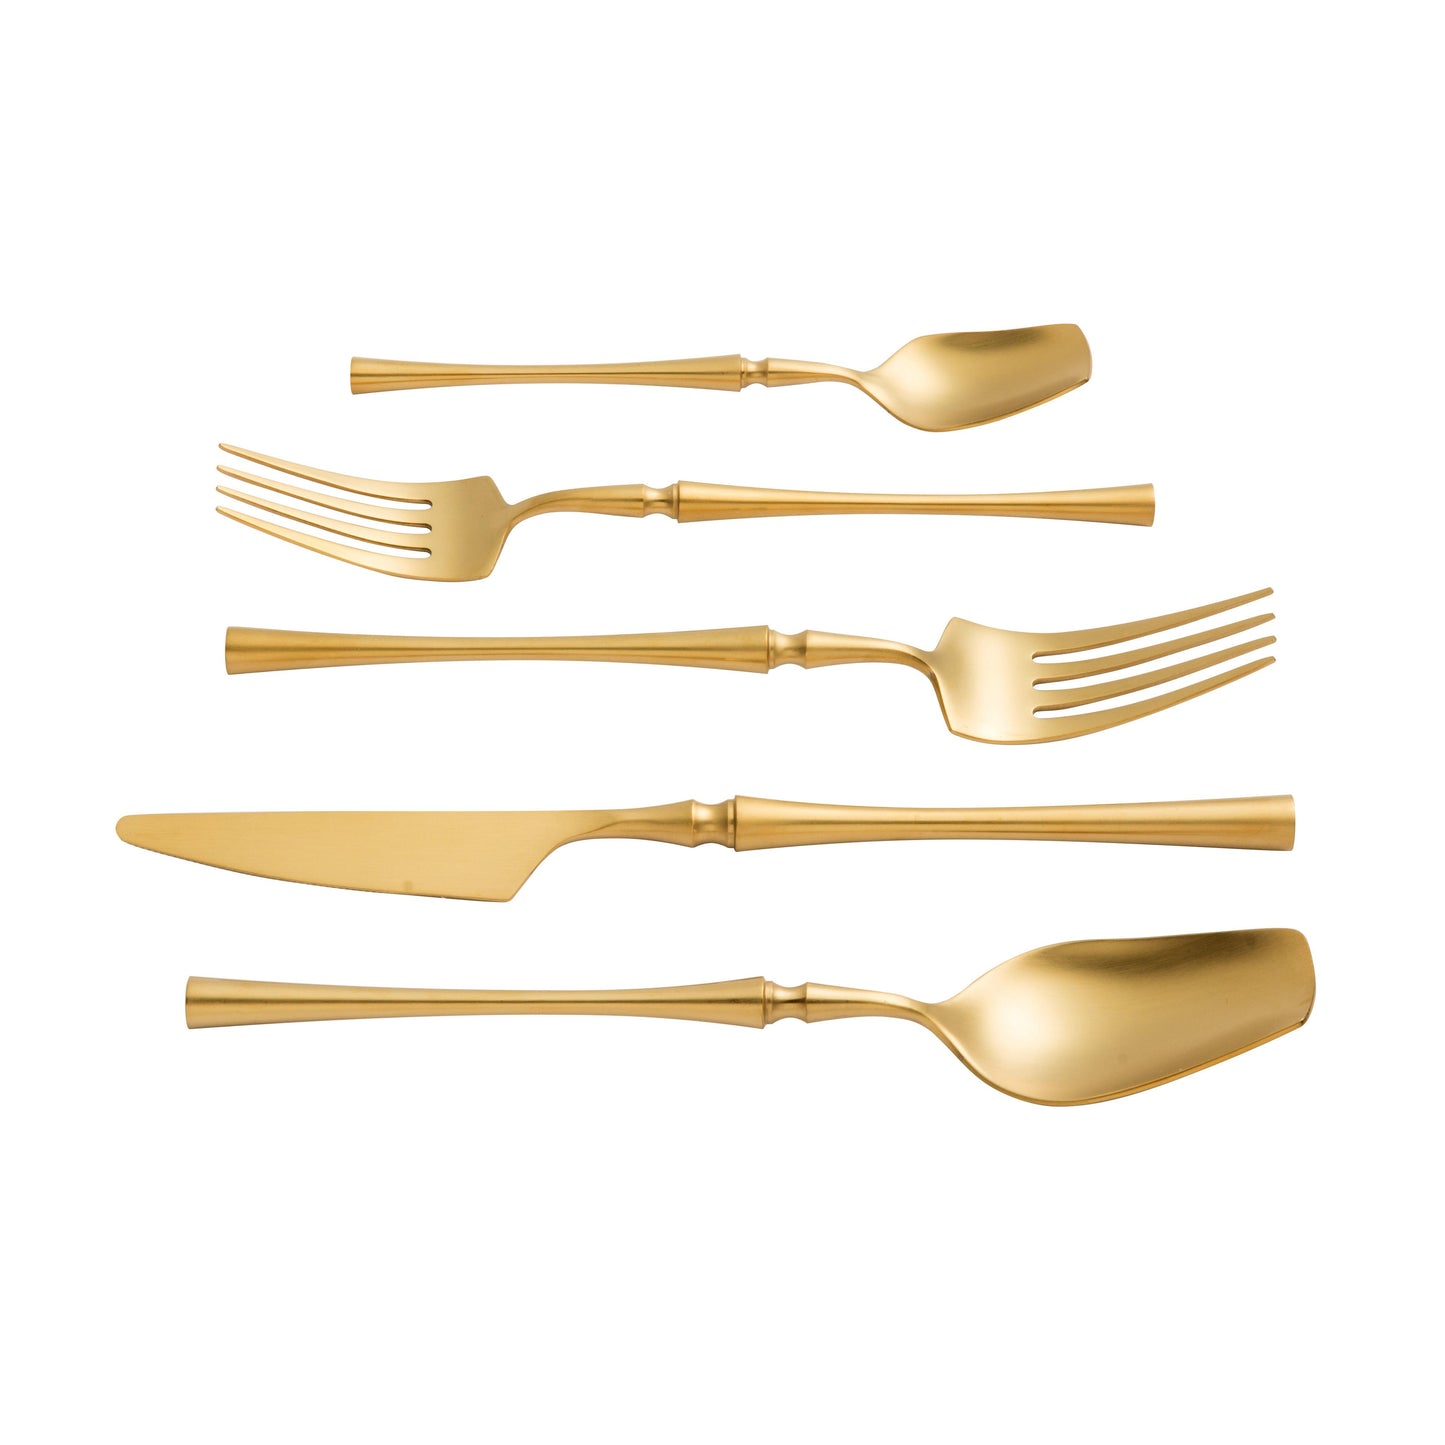 ladder brushed gold stainless steel flatware - set of 5 pieces - service for 1